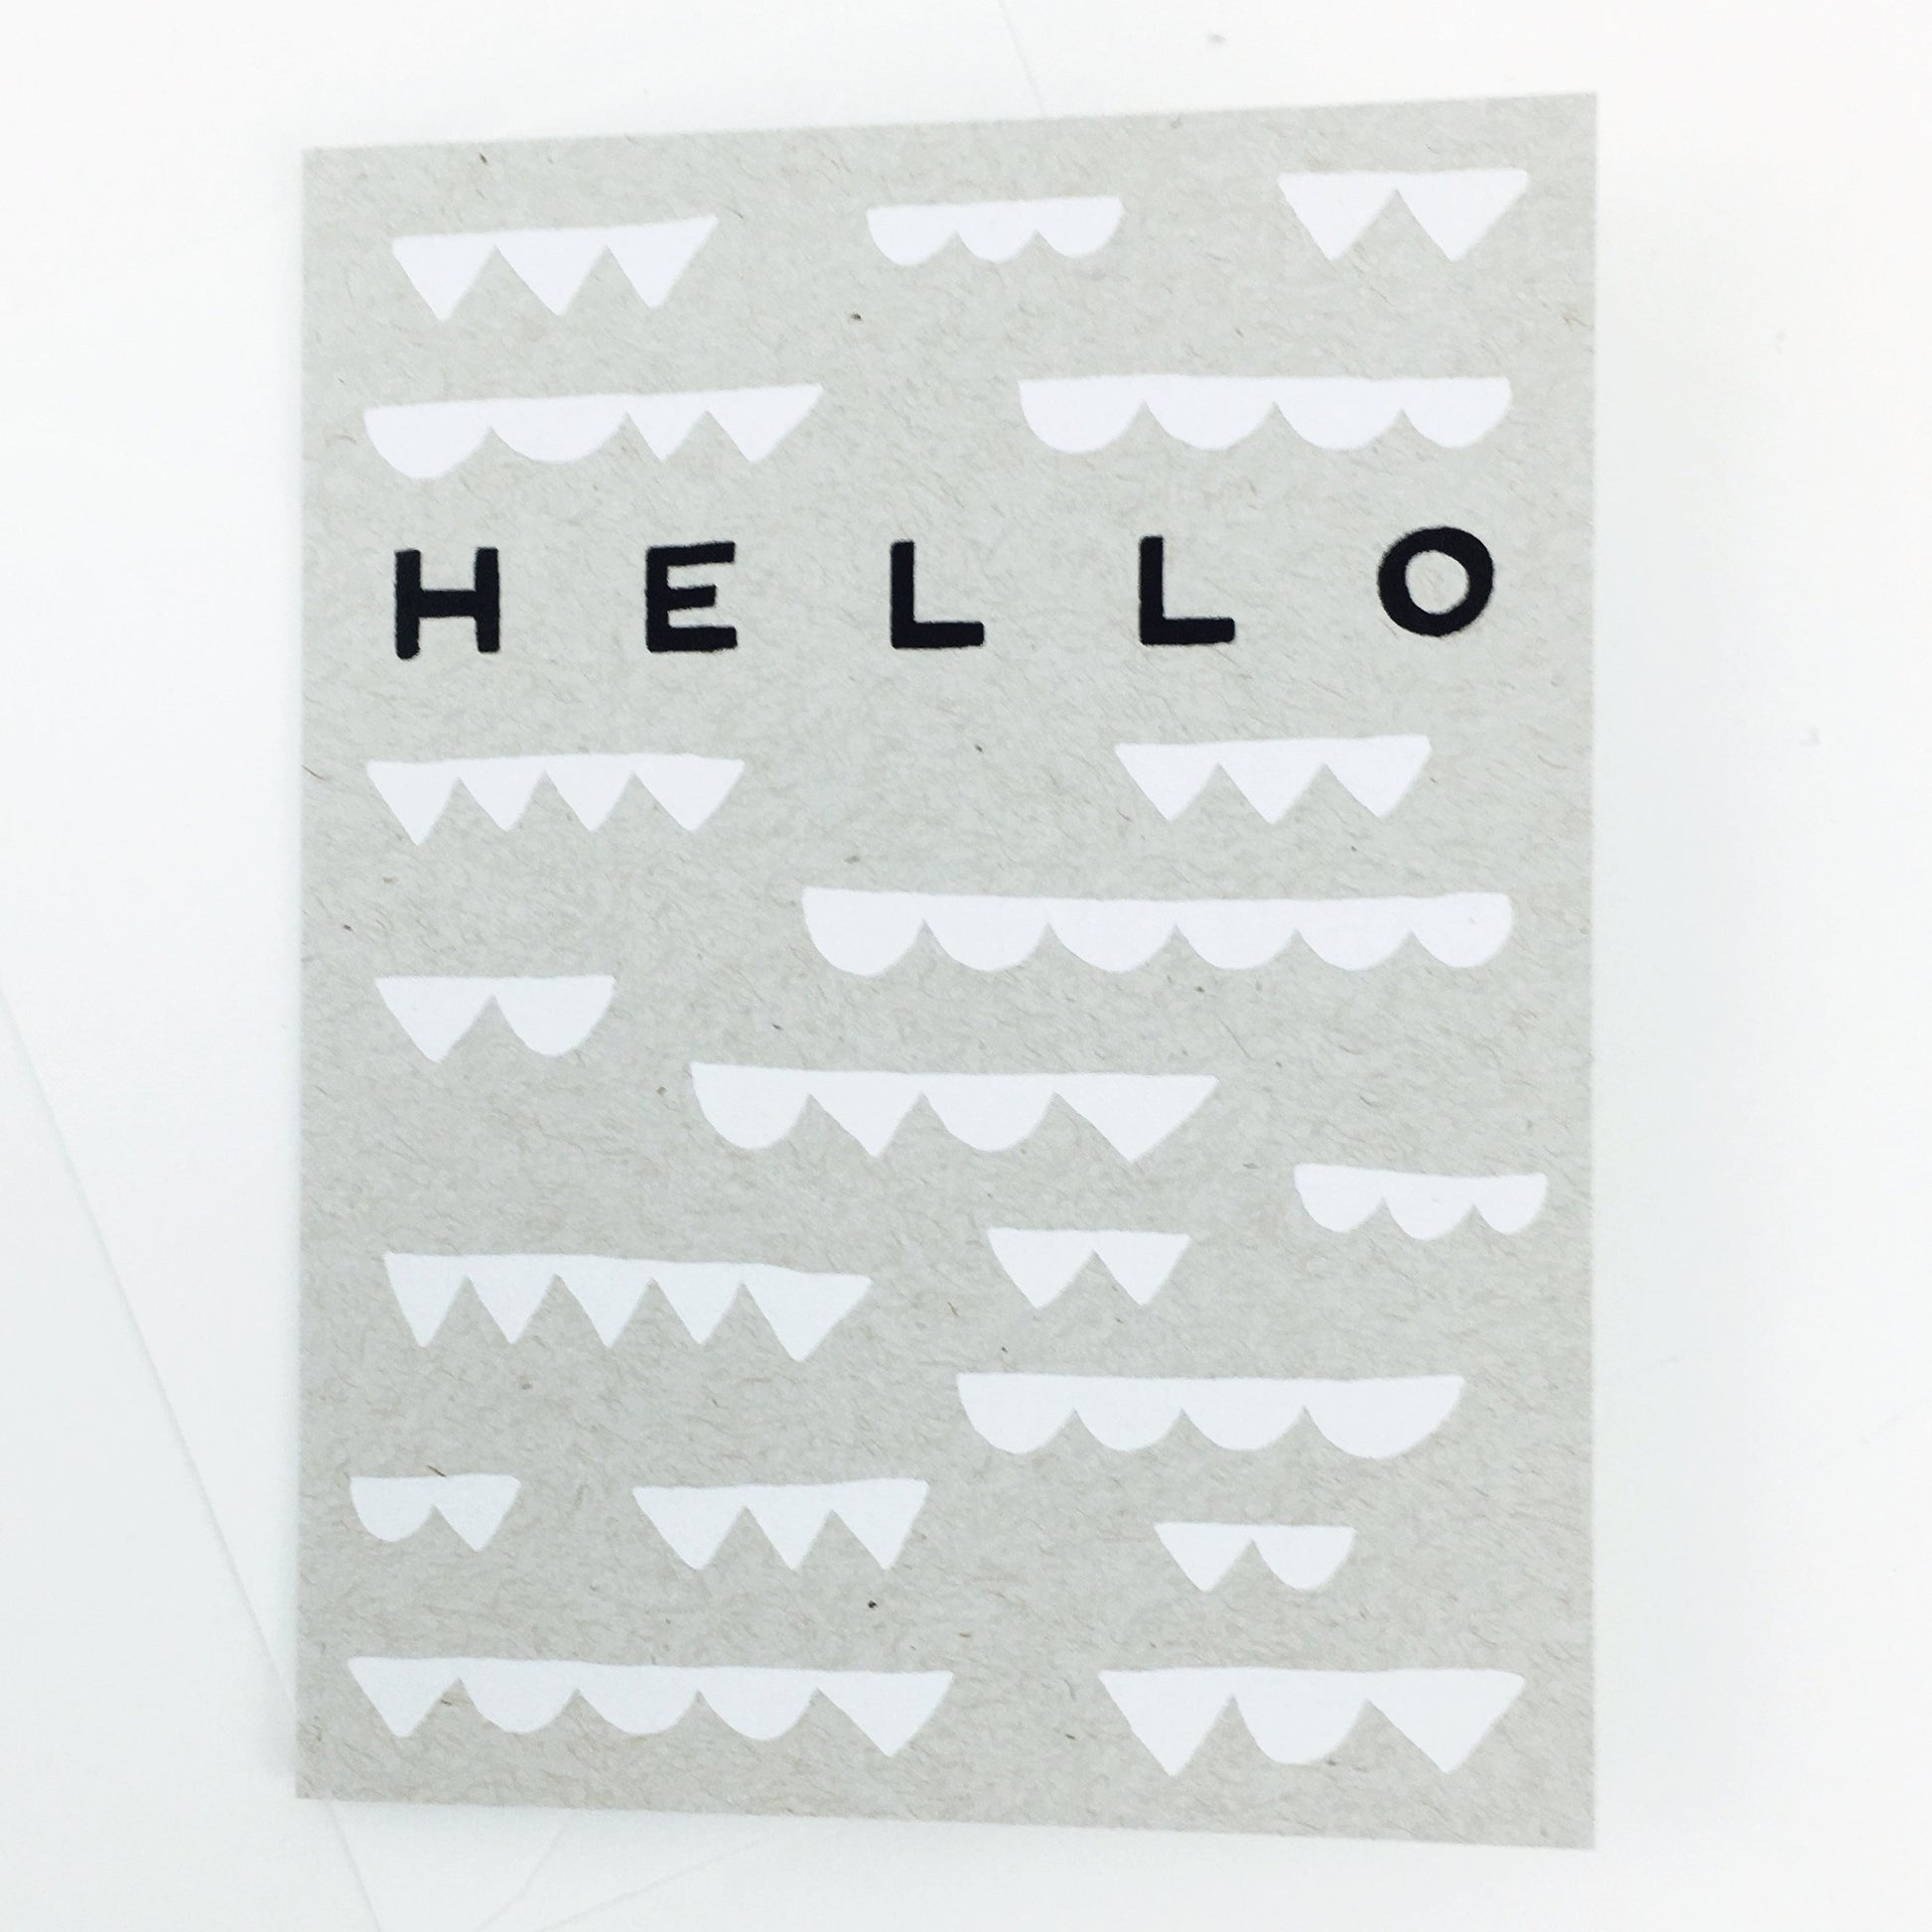 "Hello" Cloud Card by Worthwhile Paper - by Worthwhile Paper - K. A. Artist Shop